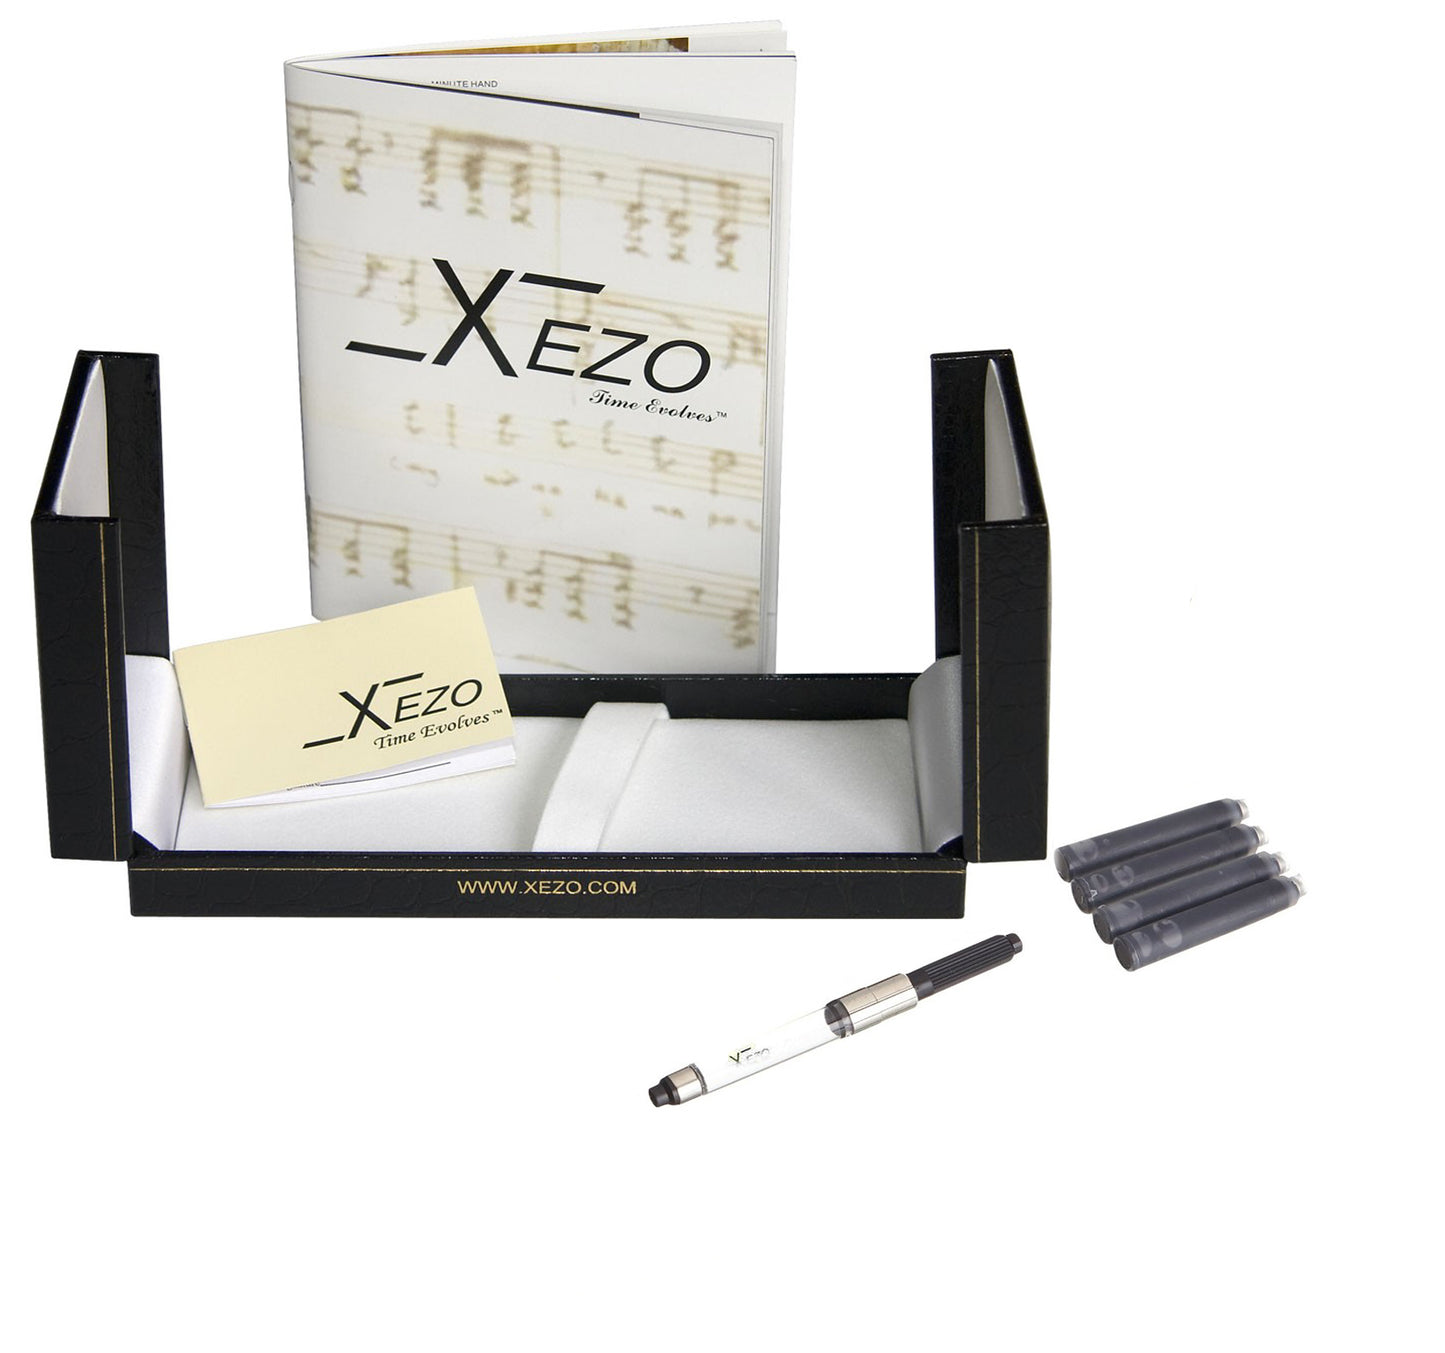 Xezo - Black gift box, certificate, manual, chrome-plated ink converter, and four ink cartridges of the Phantom Stardust FM fountain pen